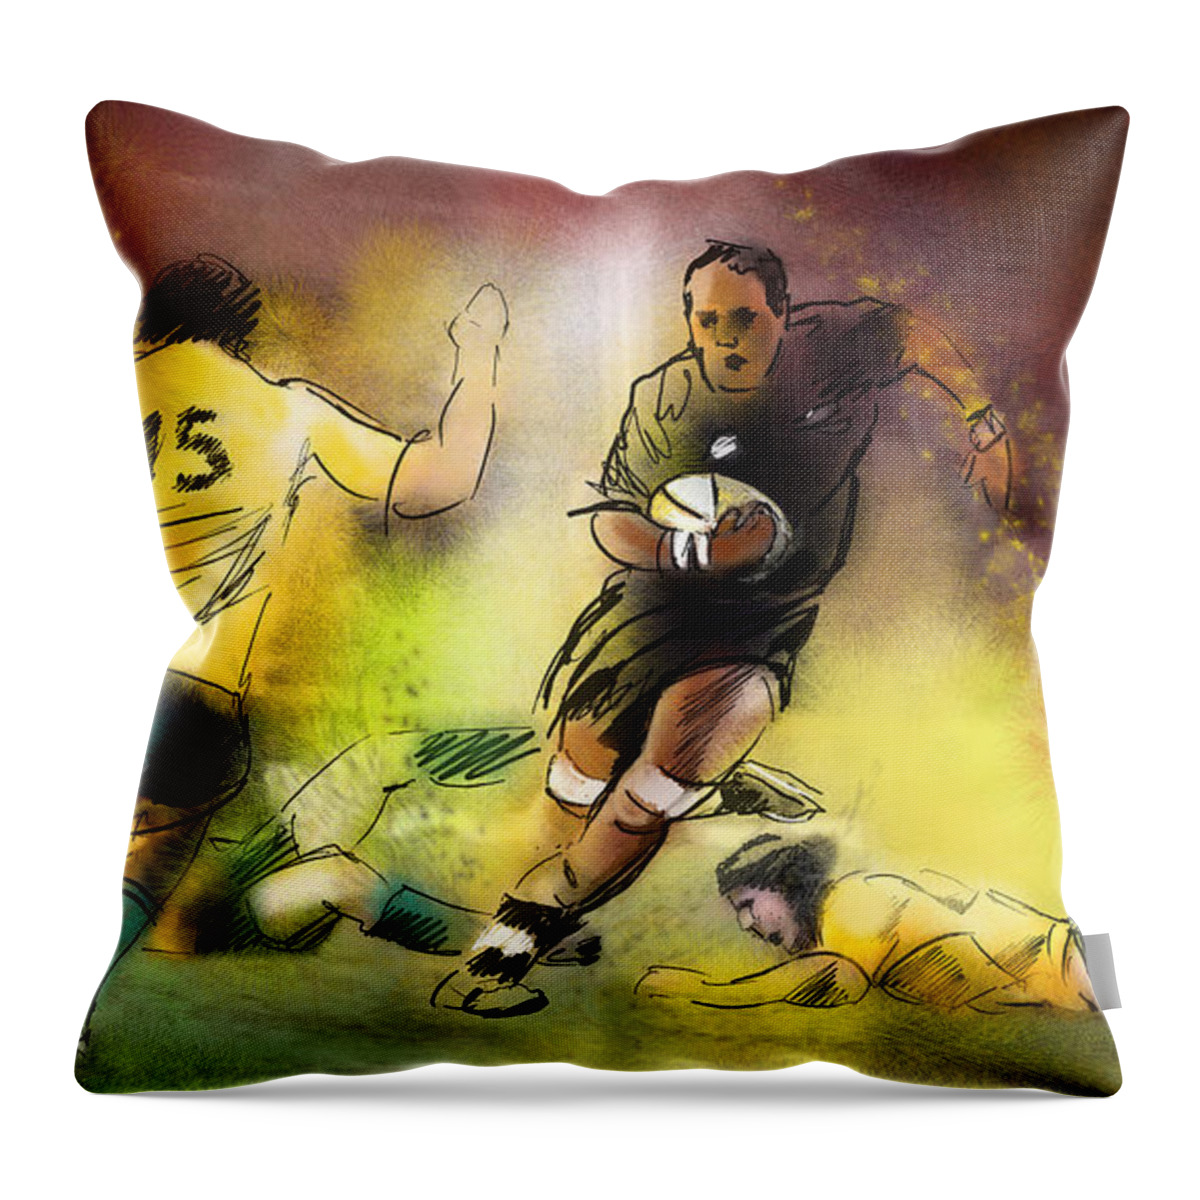 Sports Throw Pillow featuring the painting Rugby 01 by Miki De Goodaboom